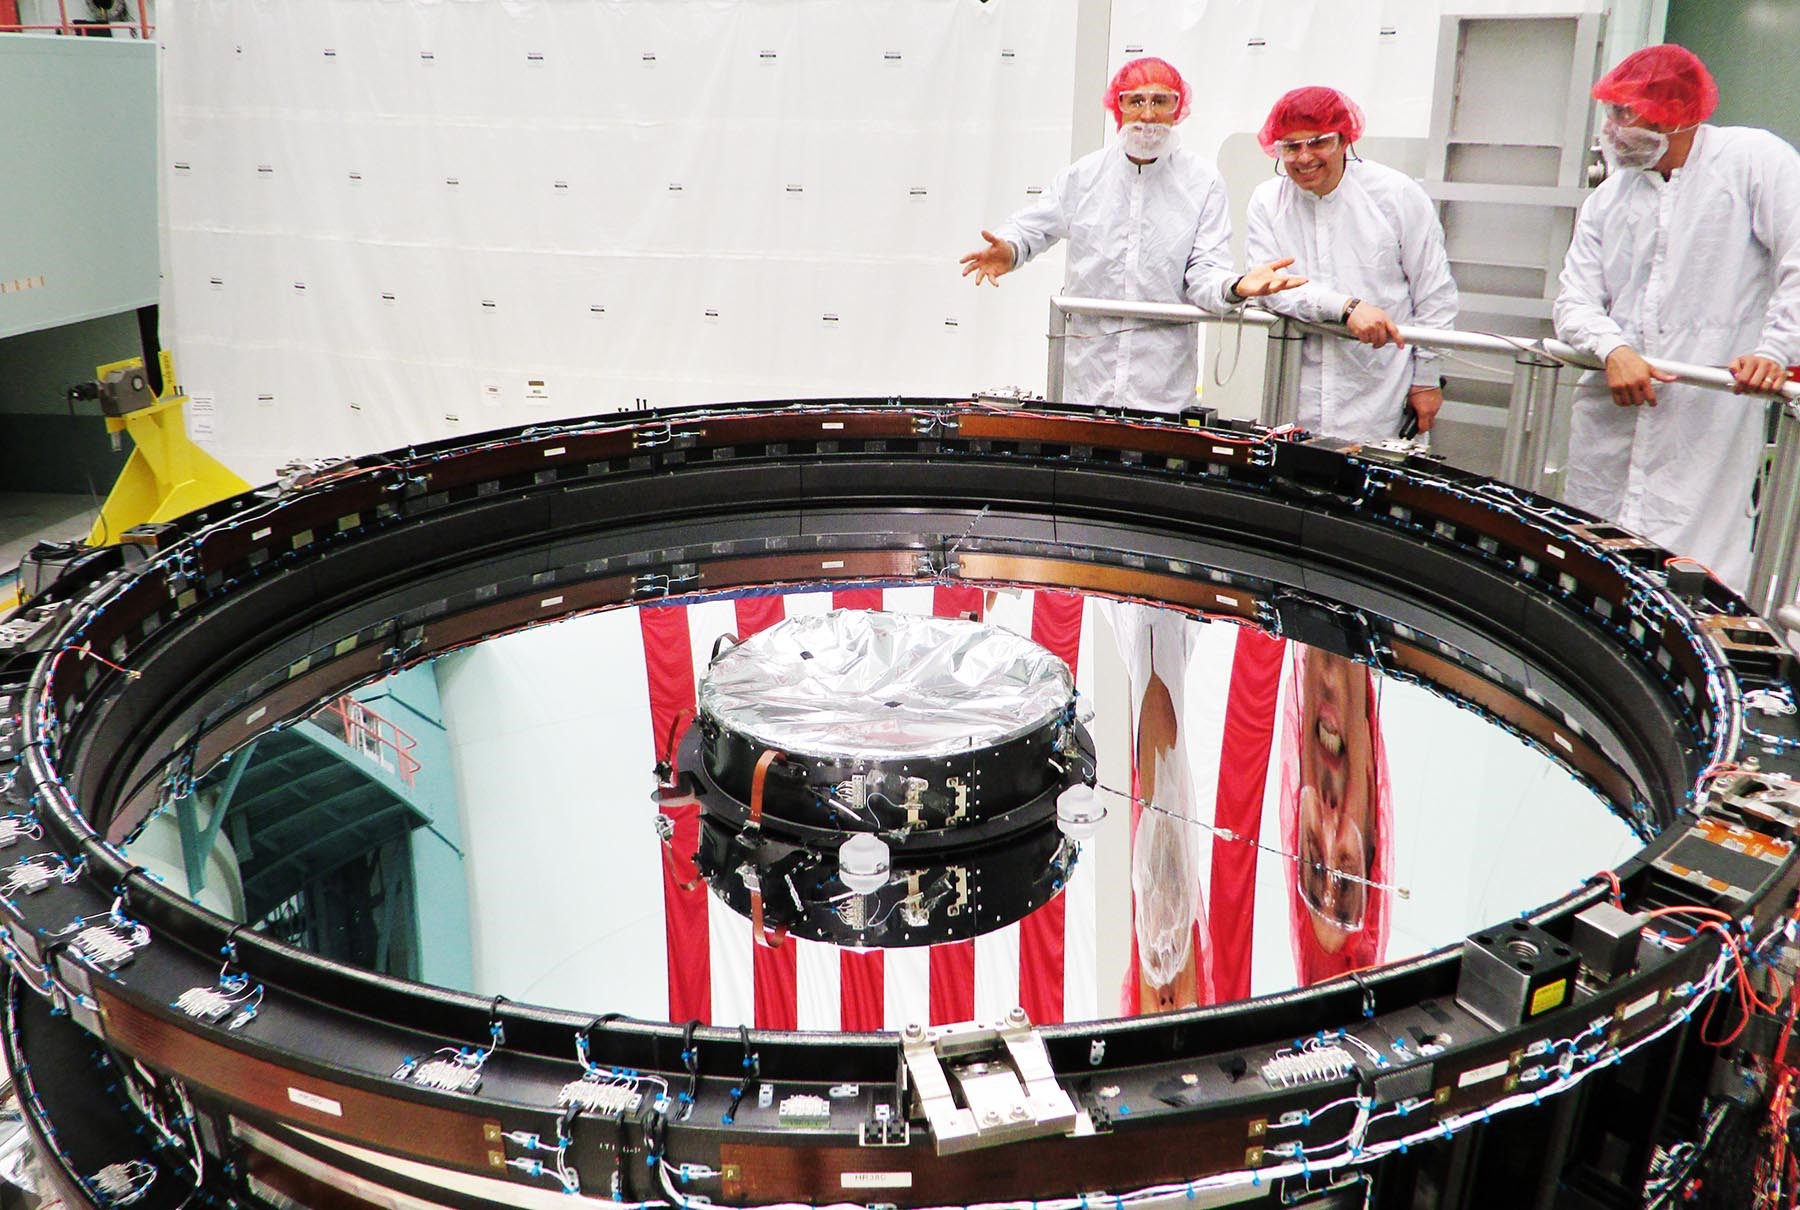 Three men wearing white lab coasts and red hair nets stand over a large round mirror